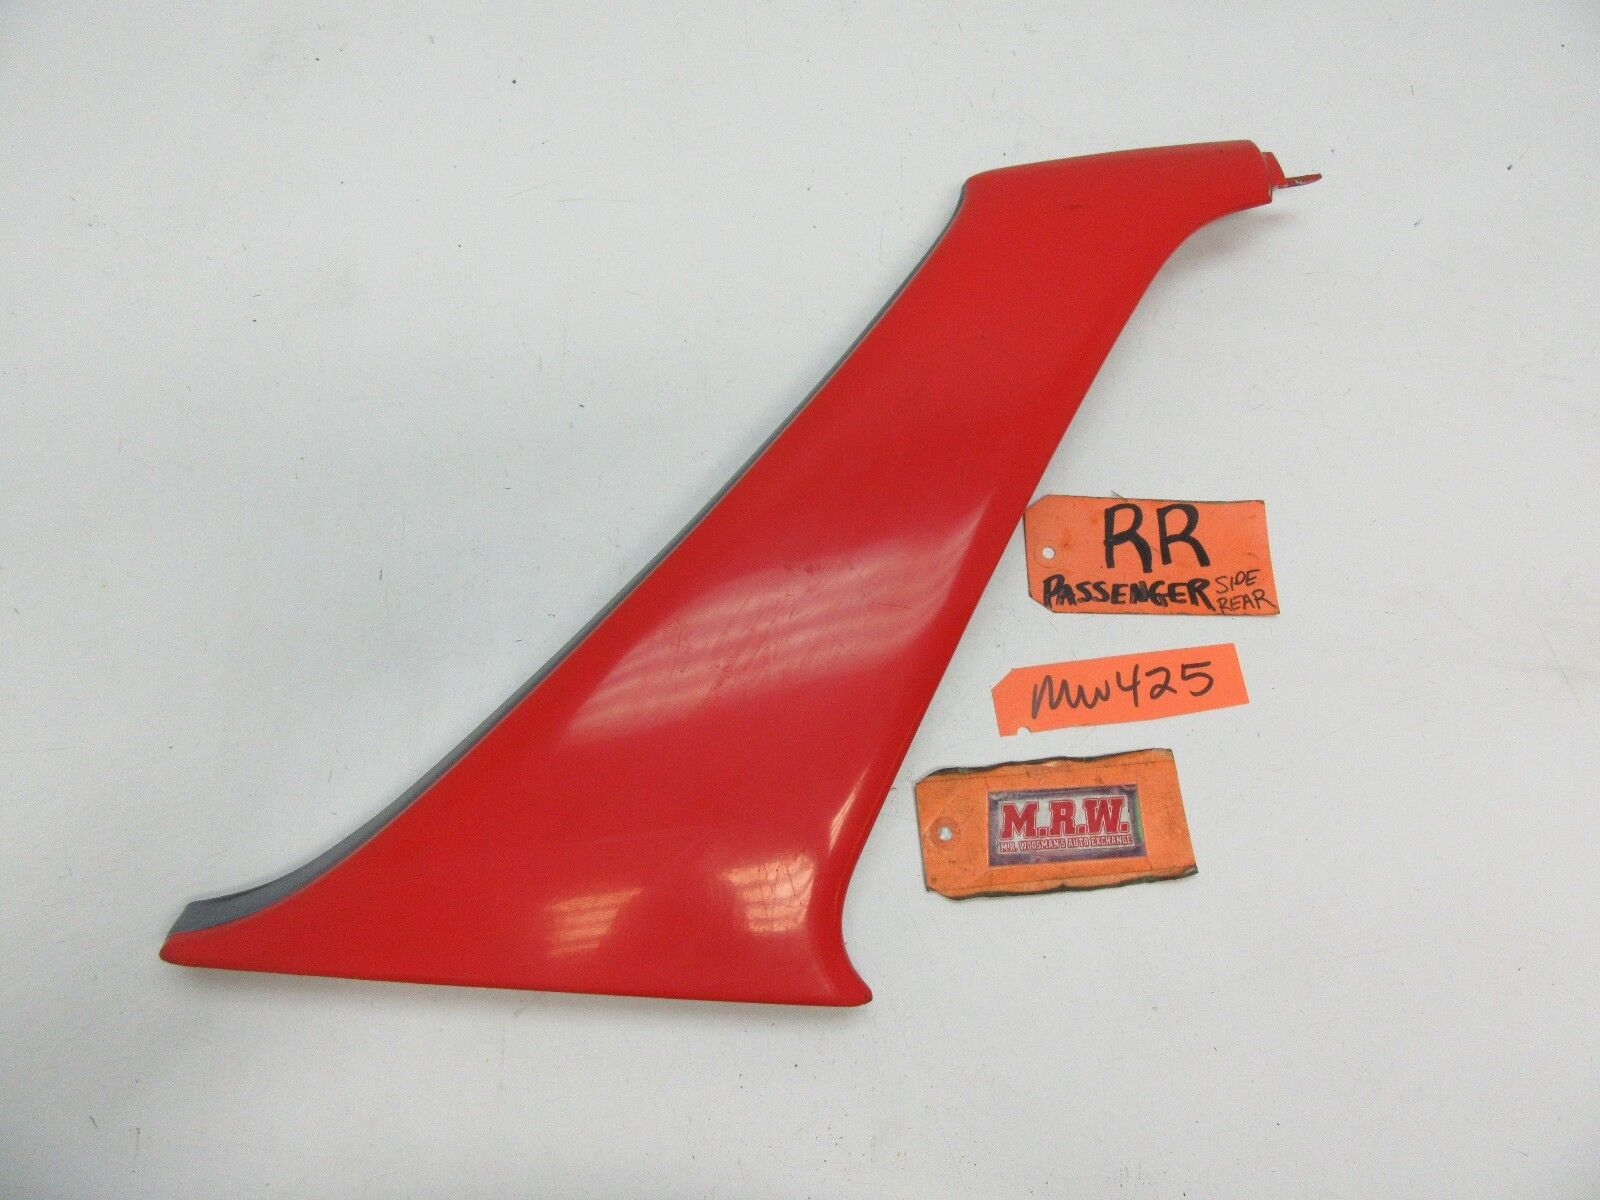 93 3000GT REAR BACK SIDE SAIL PANEL RED GLASS WINDOW QUARTER PANEL COVER TRIM R